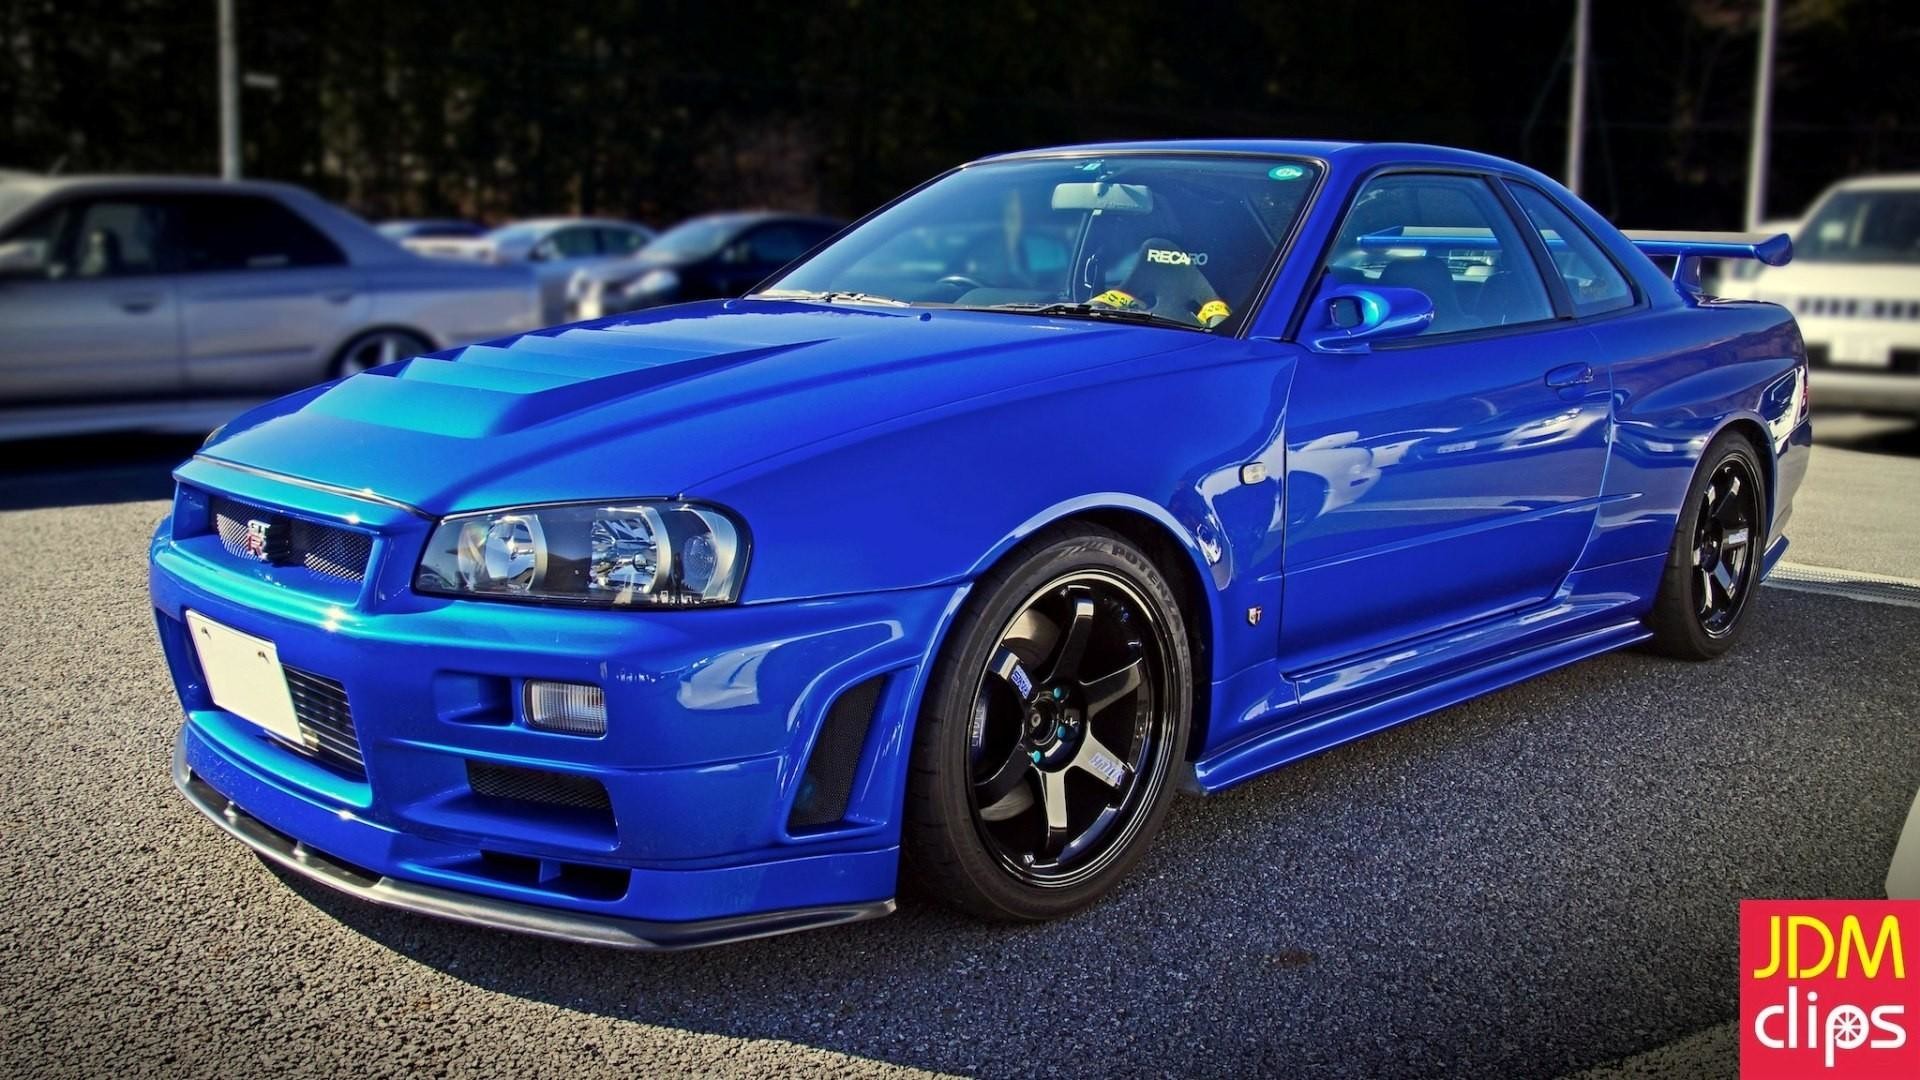 1920x1080 Stunning Nissan Skyline R34 Images - HD Wallpapers